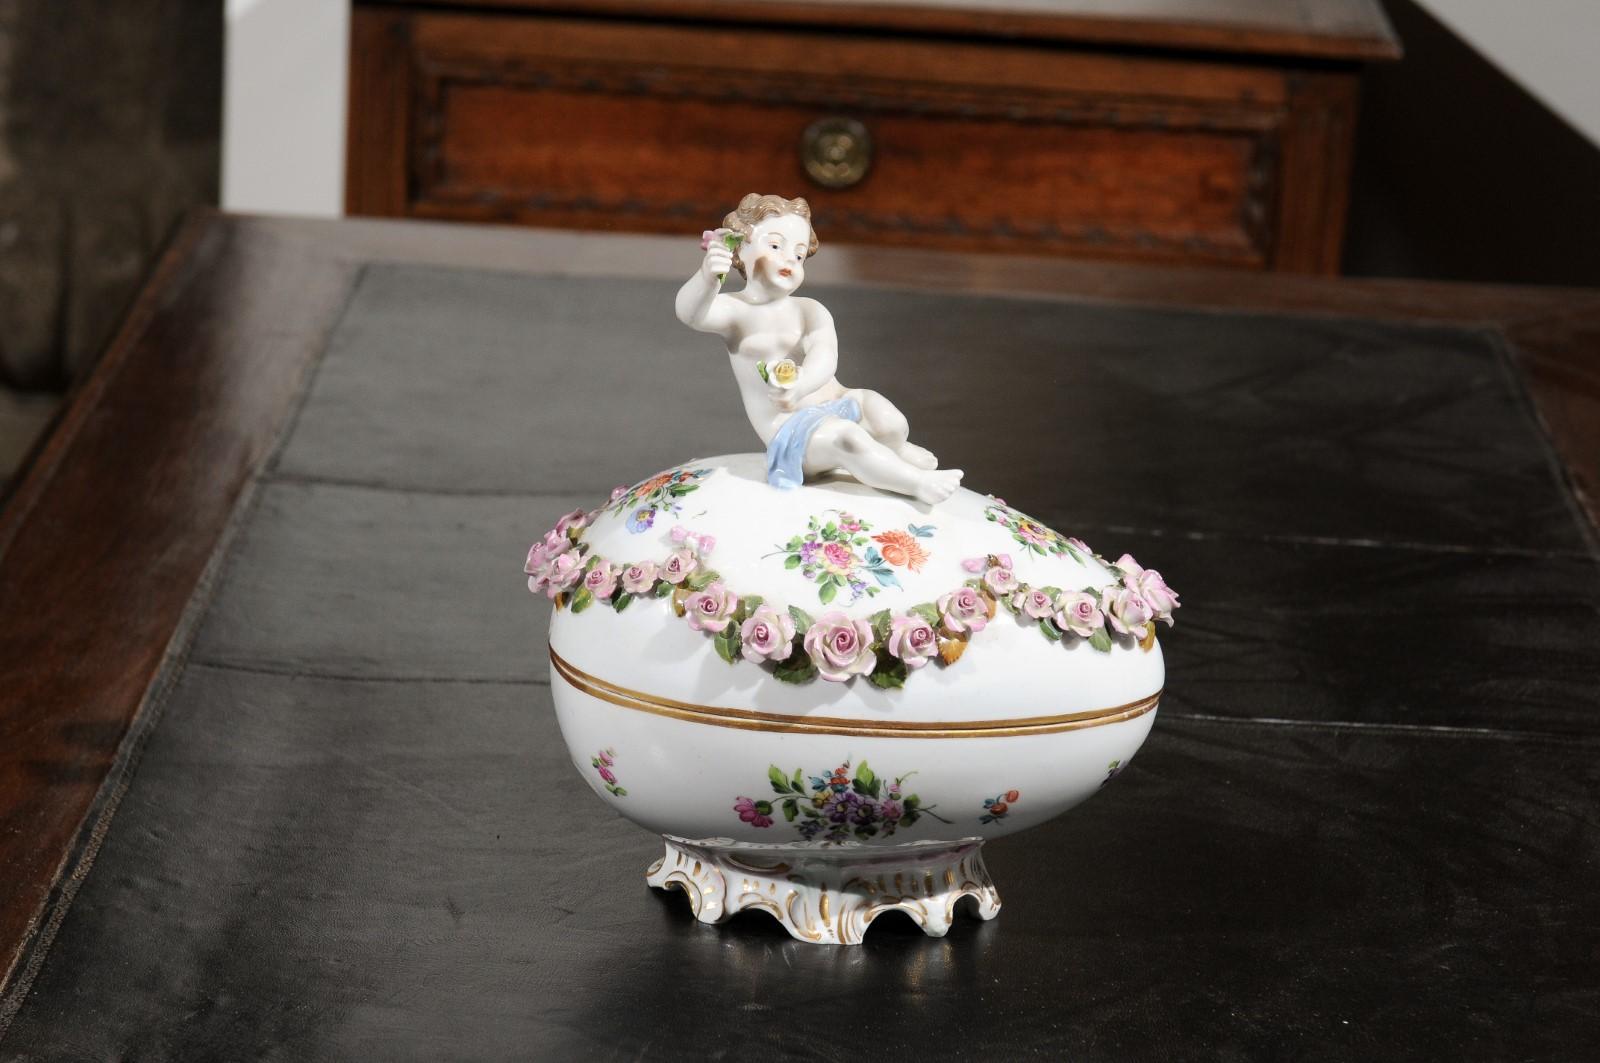 A French Sèvres Manufacture porcelain egg from the 19th century, with putto and floral hand painted décor. Born in France during the 19th century, this exquisite decorative egg features an oval lid beautifully adorned with a putto holding a delicate